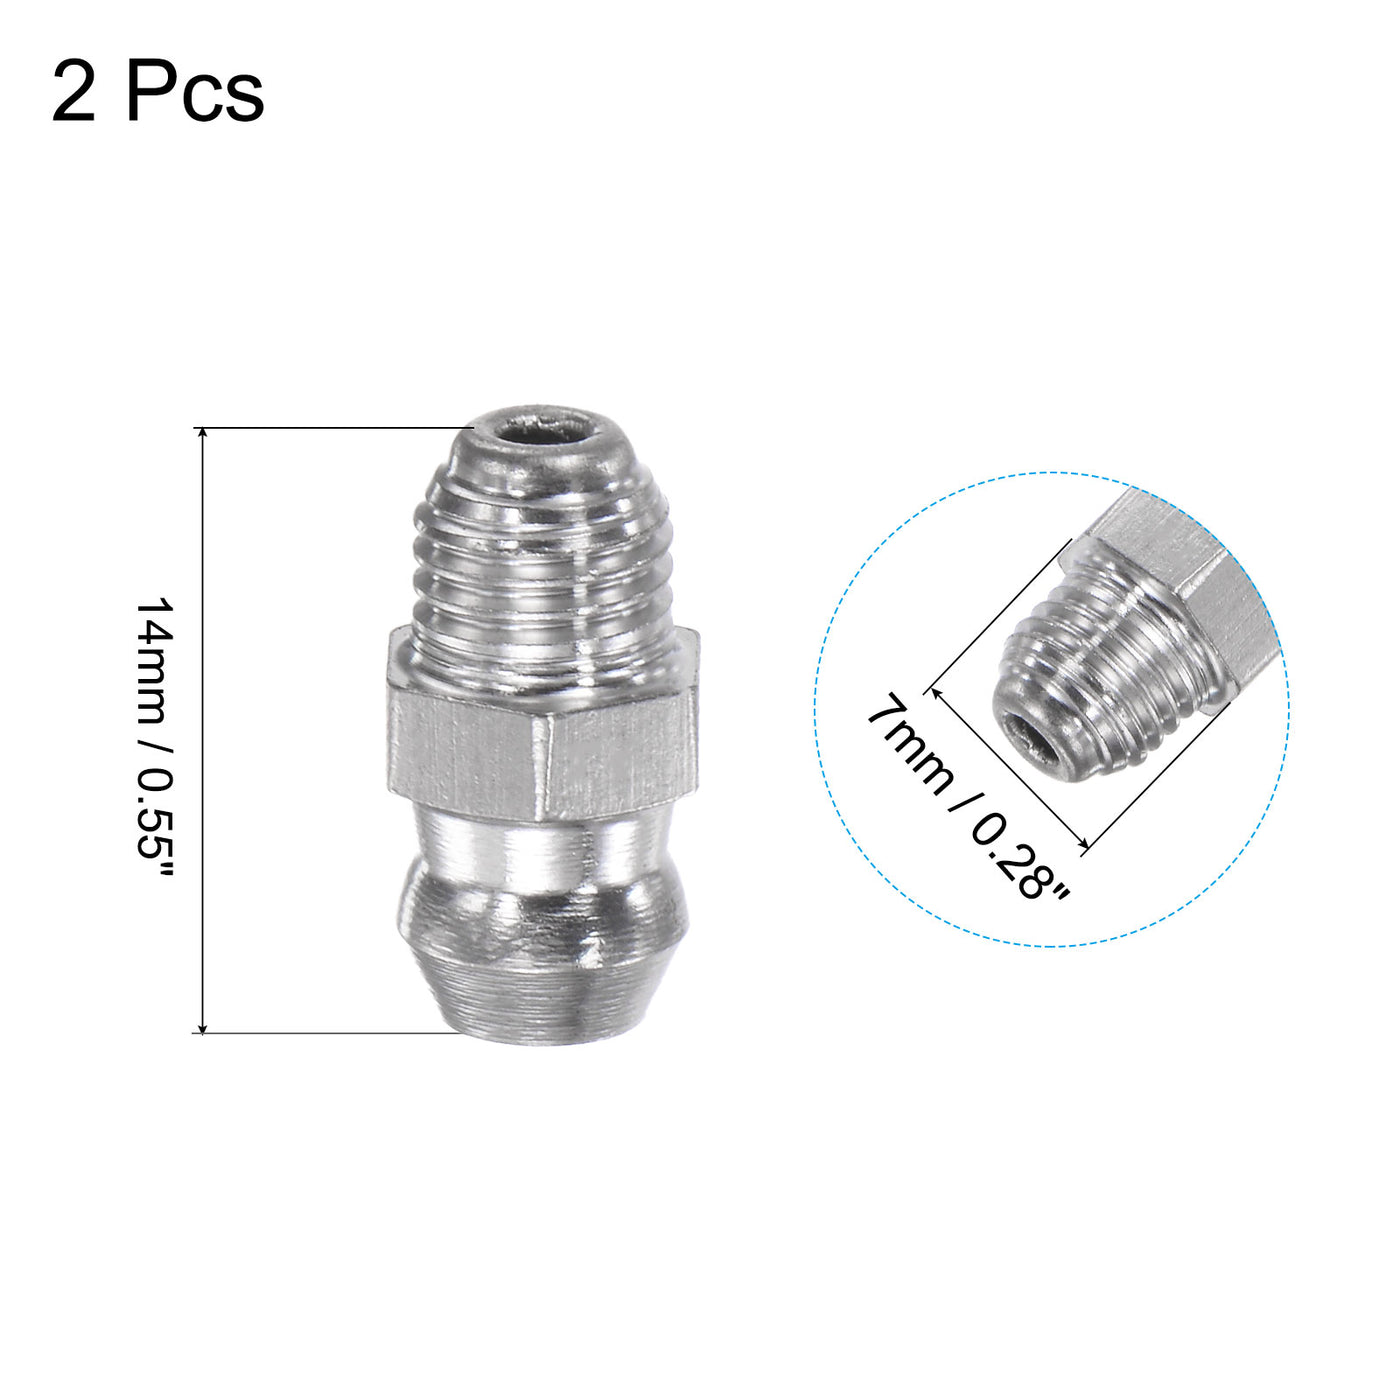 uxcell Uxcell 2Pcs Metric Stainless Steel Straight Hydraulic Grease Fitting M6 x 0.75mm Thread